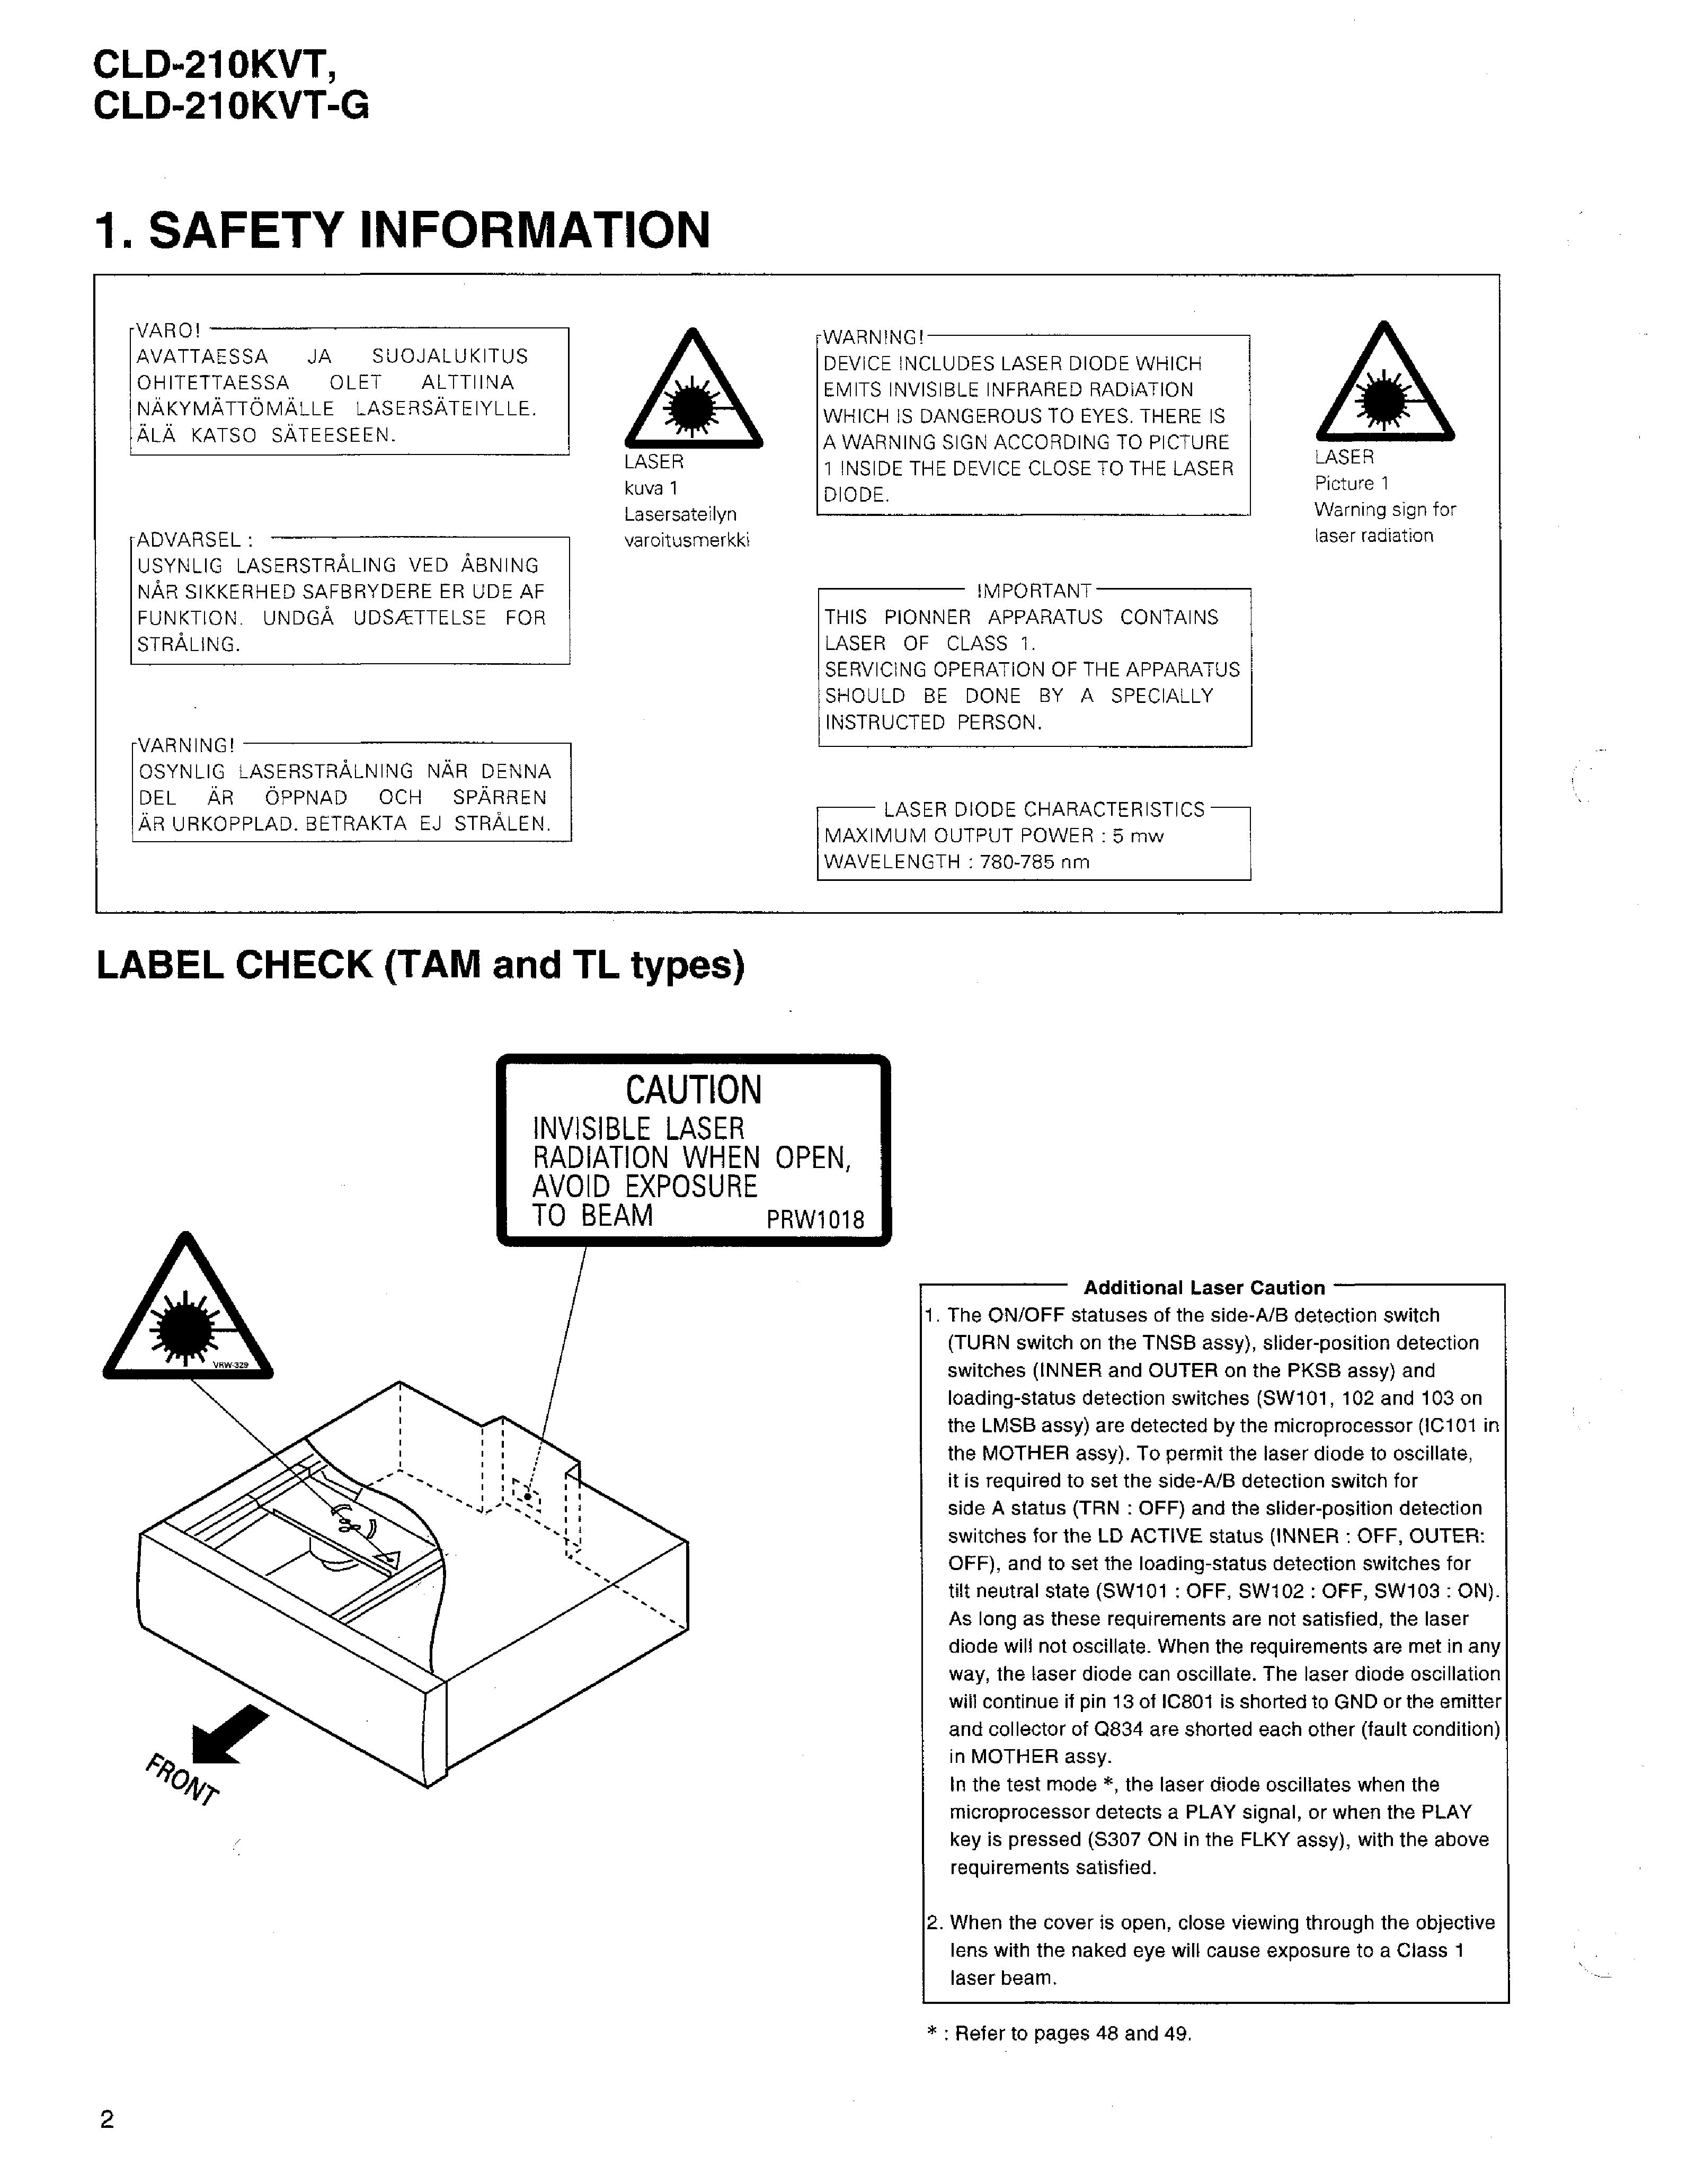 PIONEER CLD-210KVT KVT-G SM service manual (2nd page)